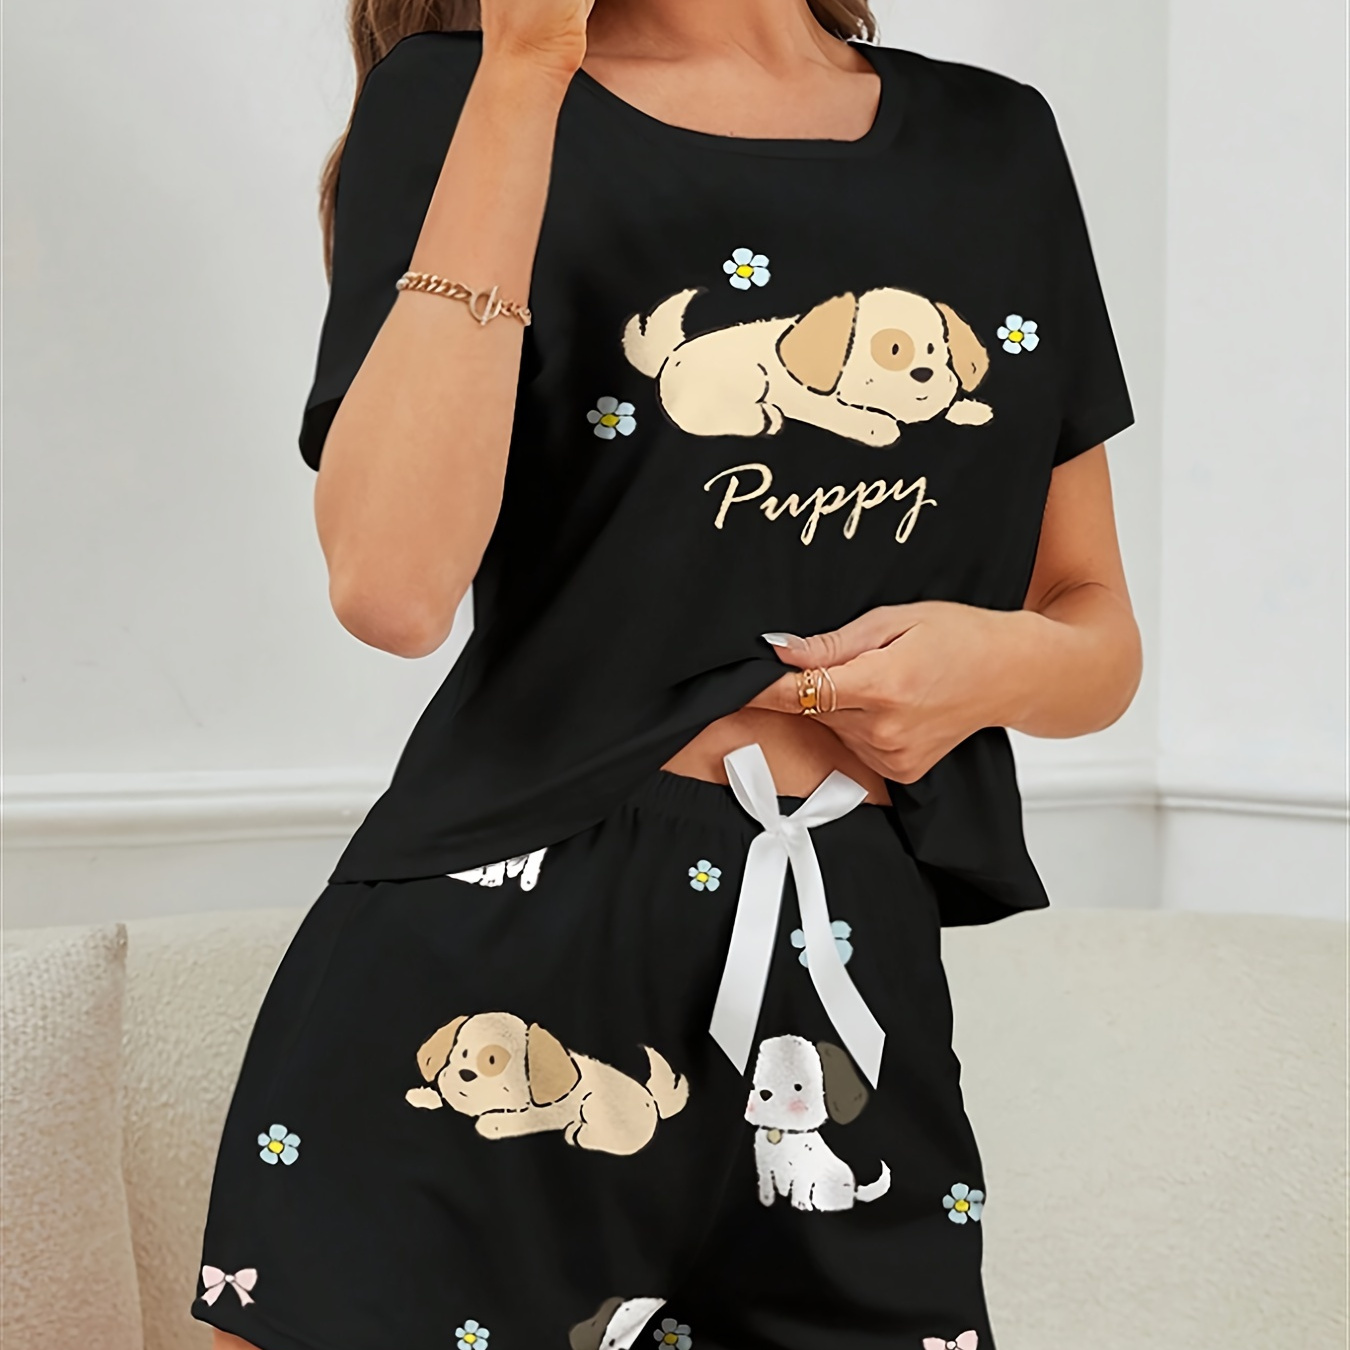 

Women's Cute Cartoon Puppy Print Pajama Set, Short Sleeve Round Neck Top & Shorts, Comfortable Relaxed Fit